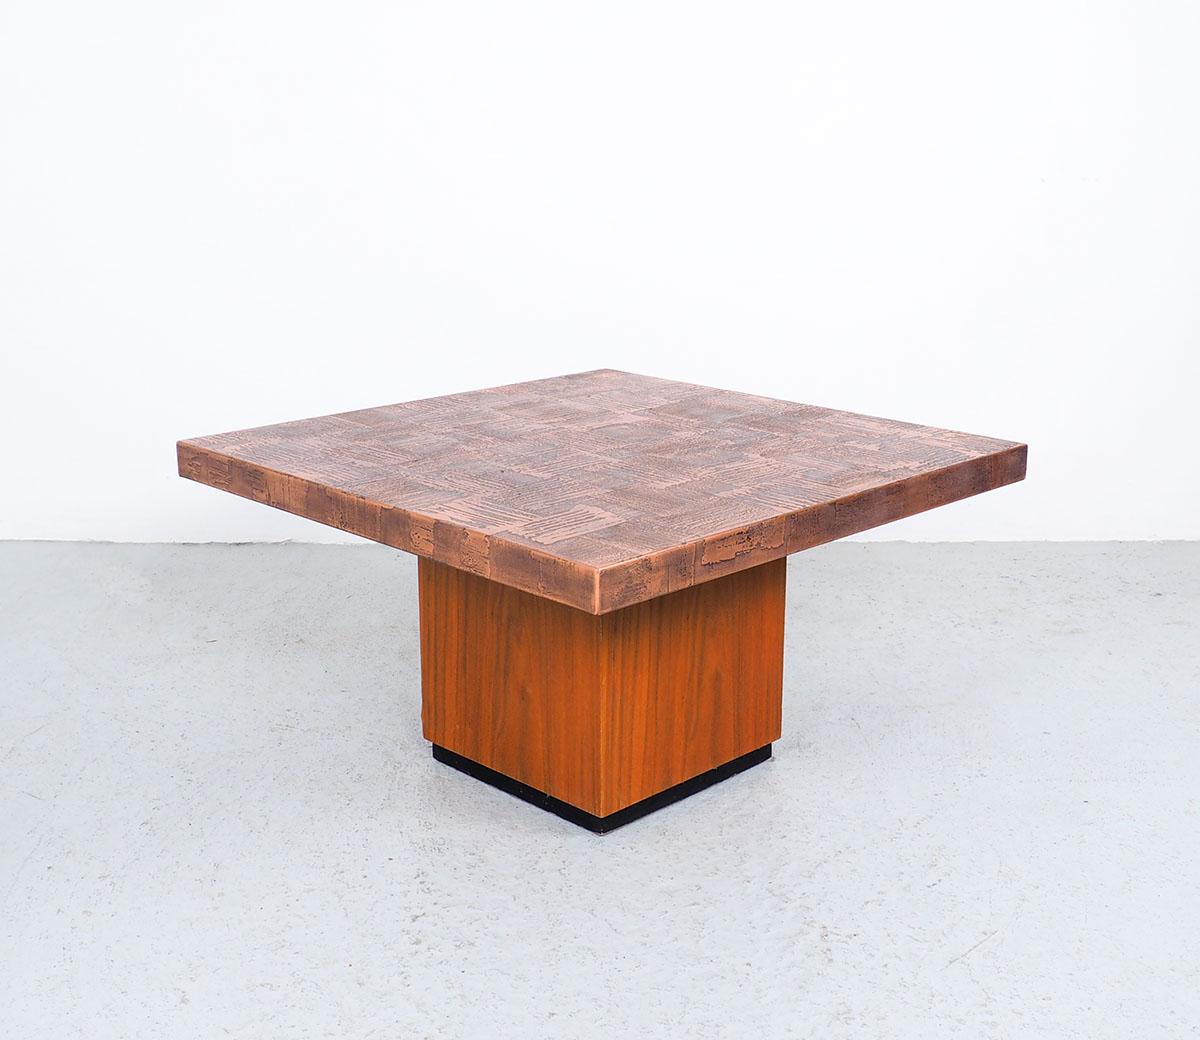 Vintage artistic brutalist square coffee table designed by the German artist Heinz Lilienthal (1927-2006).
Designed in the 1970s.
The table has an etched copper top with a teak wooden block base.
The table has a warm and sturdy look due to the